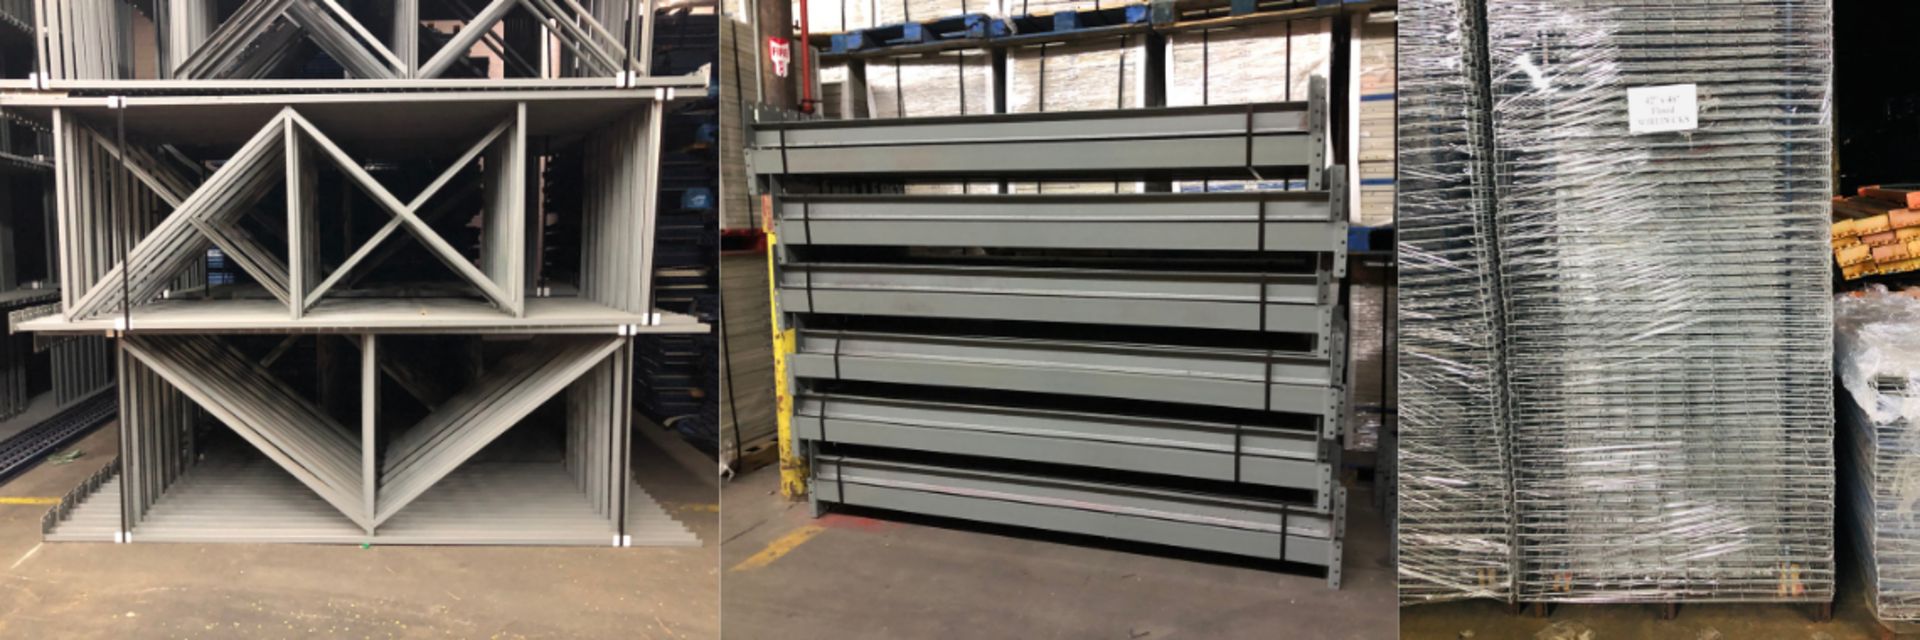 9 BAYS OF 10.5'H X 42"D X 93"L STRUCTURAL STYLE PALLET RACKS - Image 3 of 5